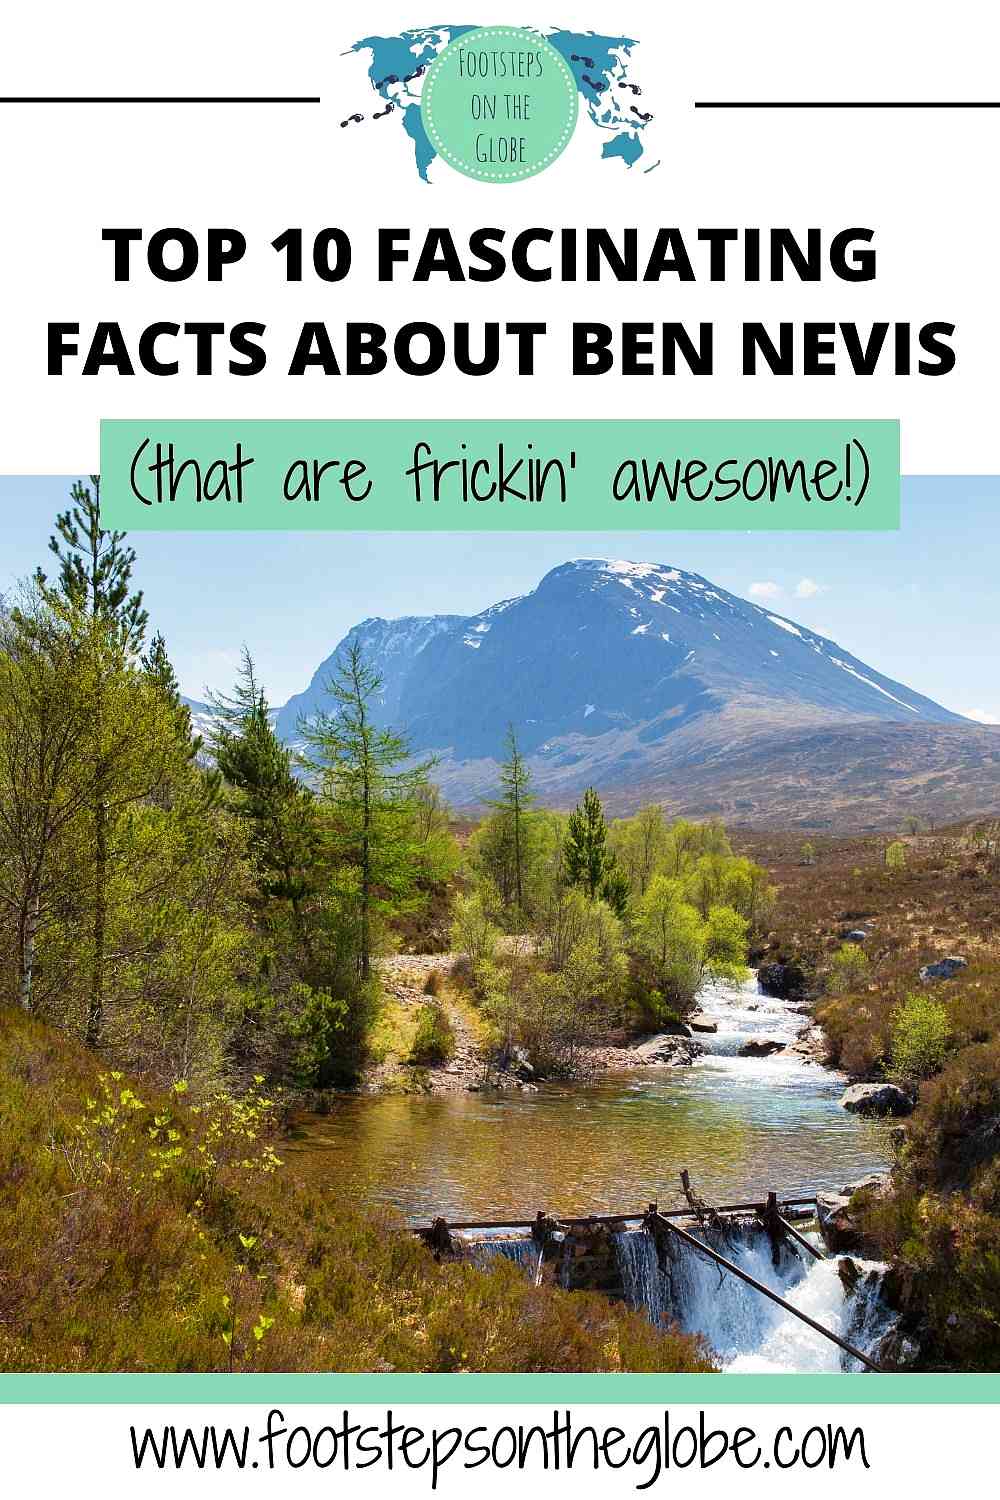 Pinterest image of a snow capped Ben Nevis surrounded by trees and a running river with the text: "Top 10 fascinating and awesome facts about Ben Nevis"